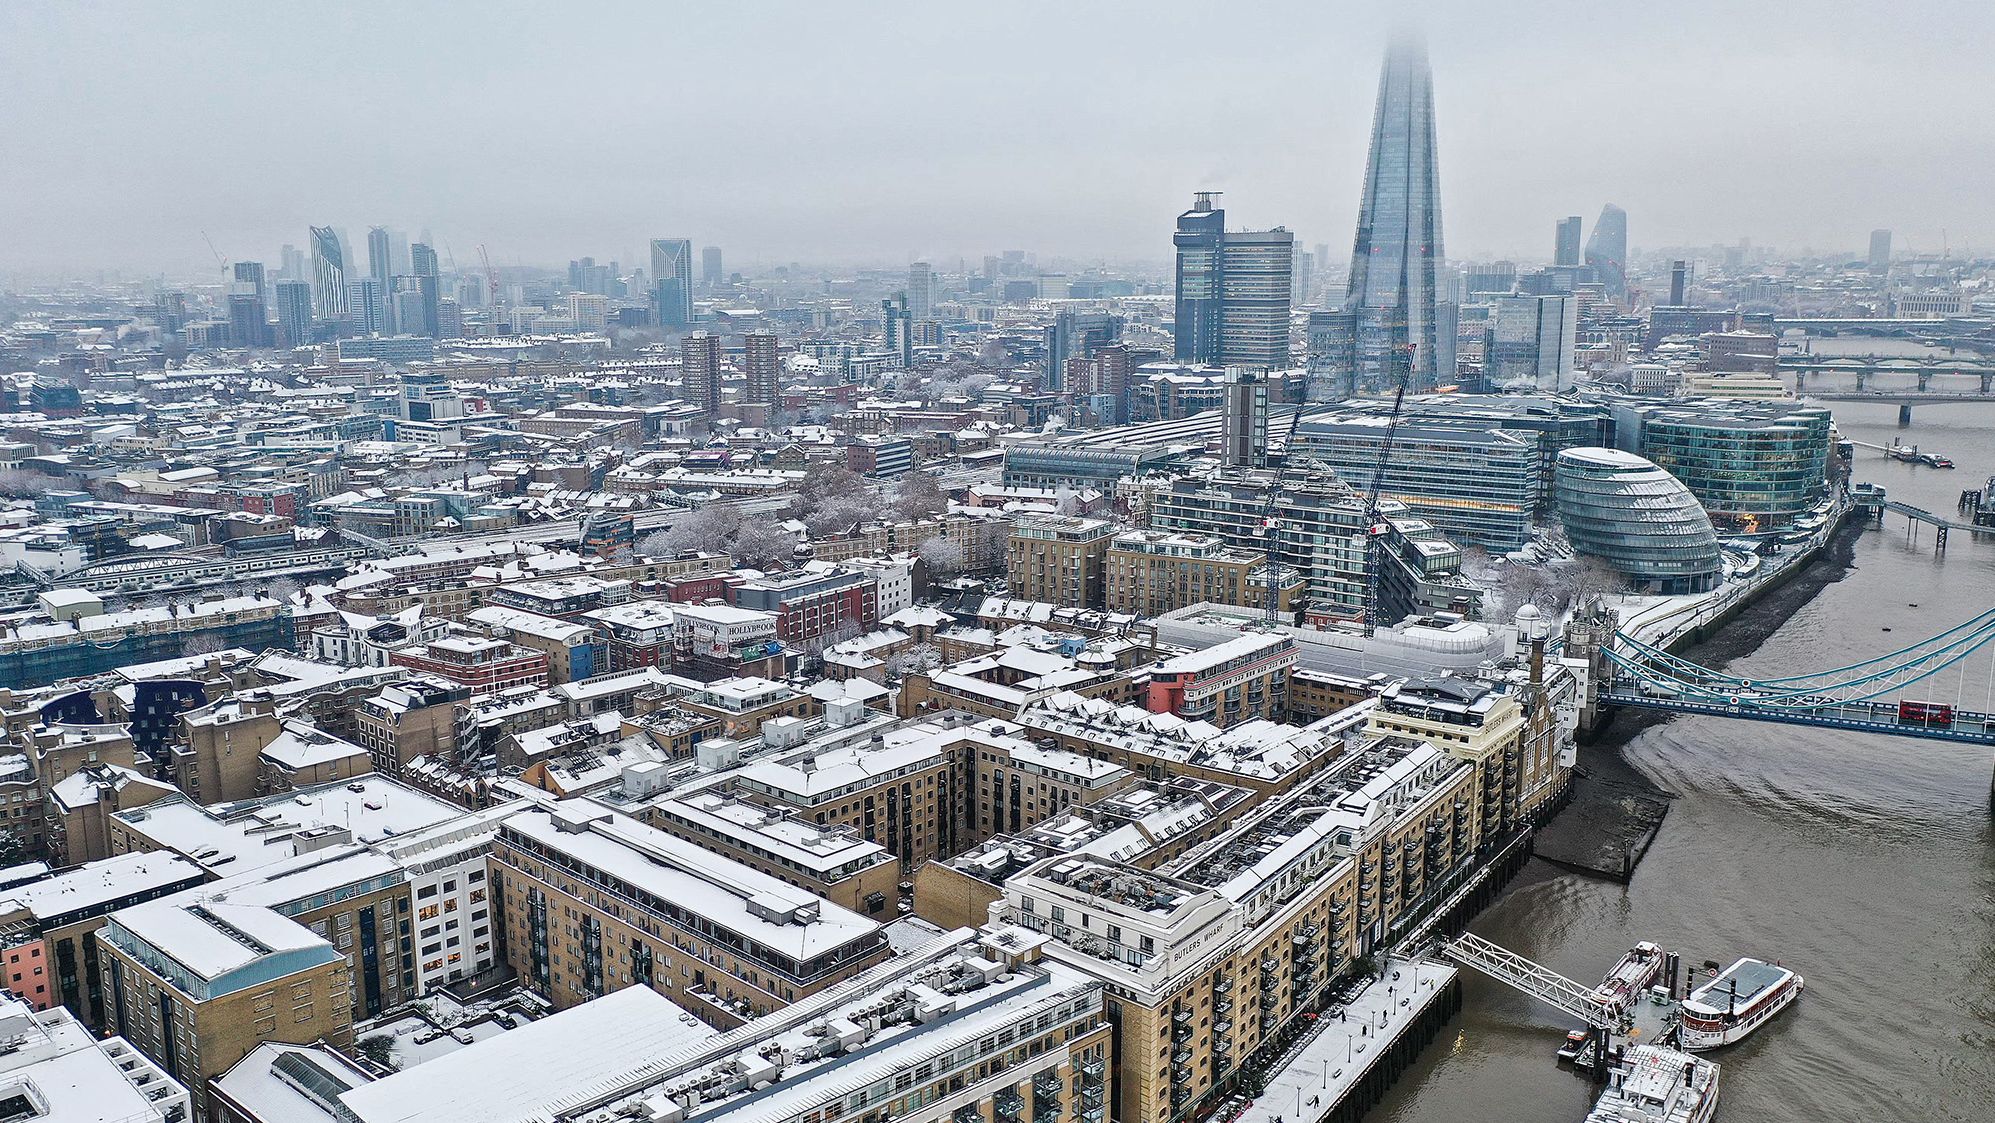 Snow hit London on Sunday evening and continued into Monday.